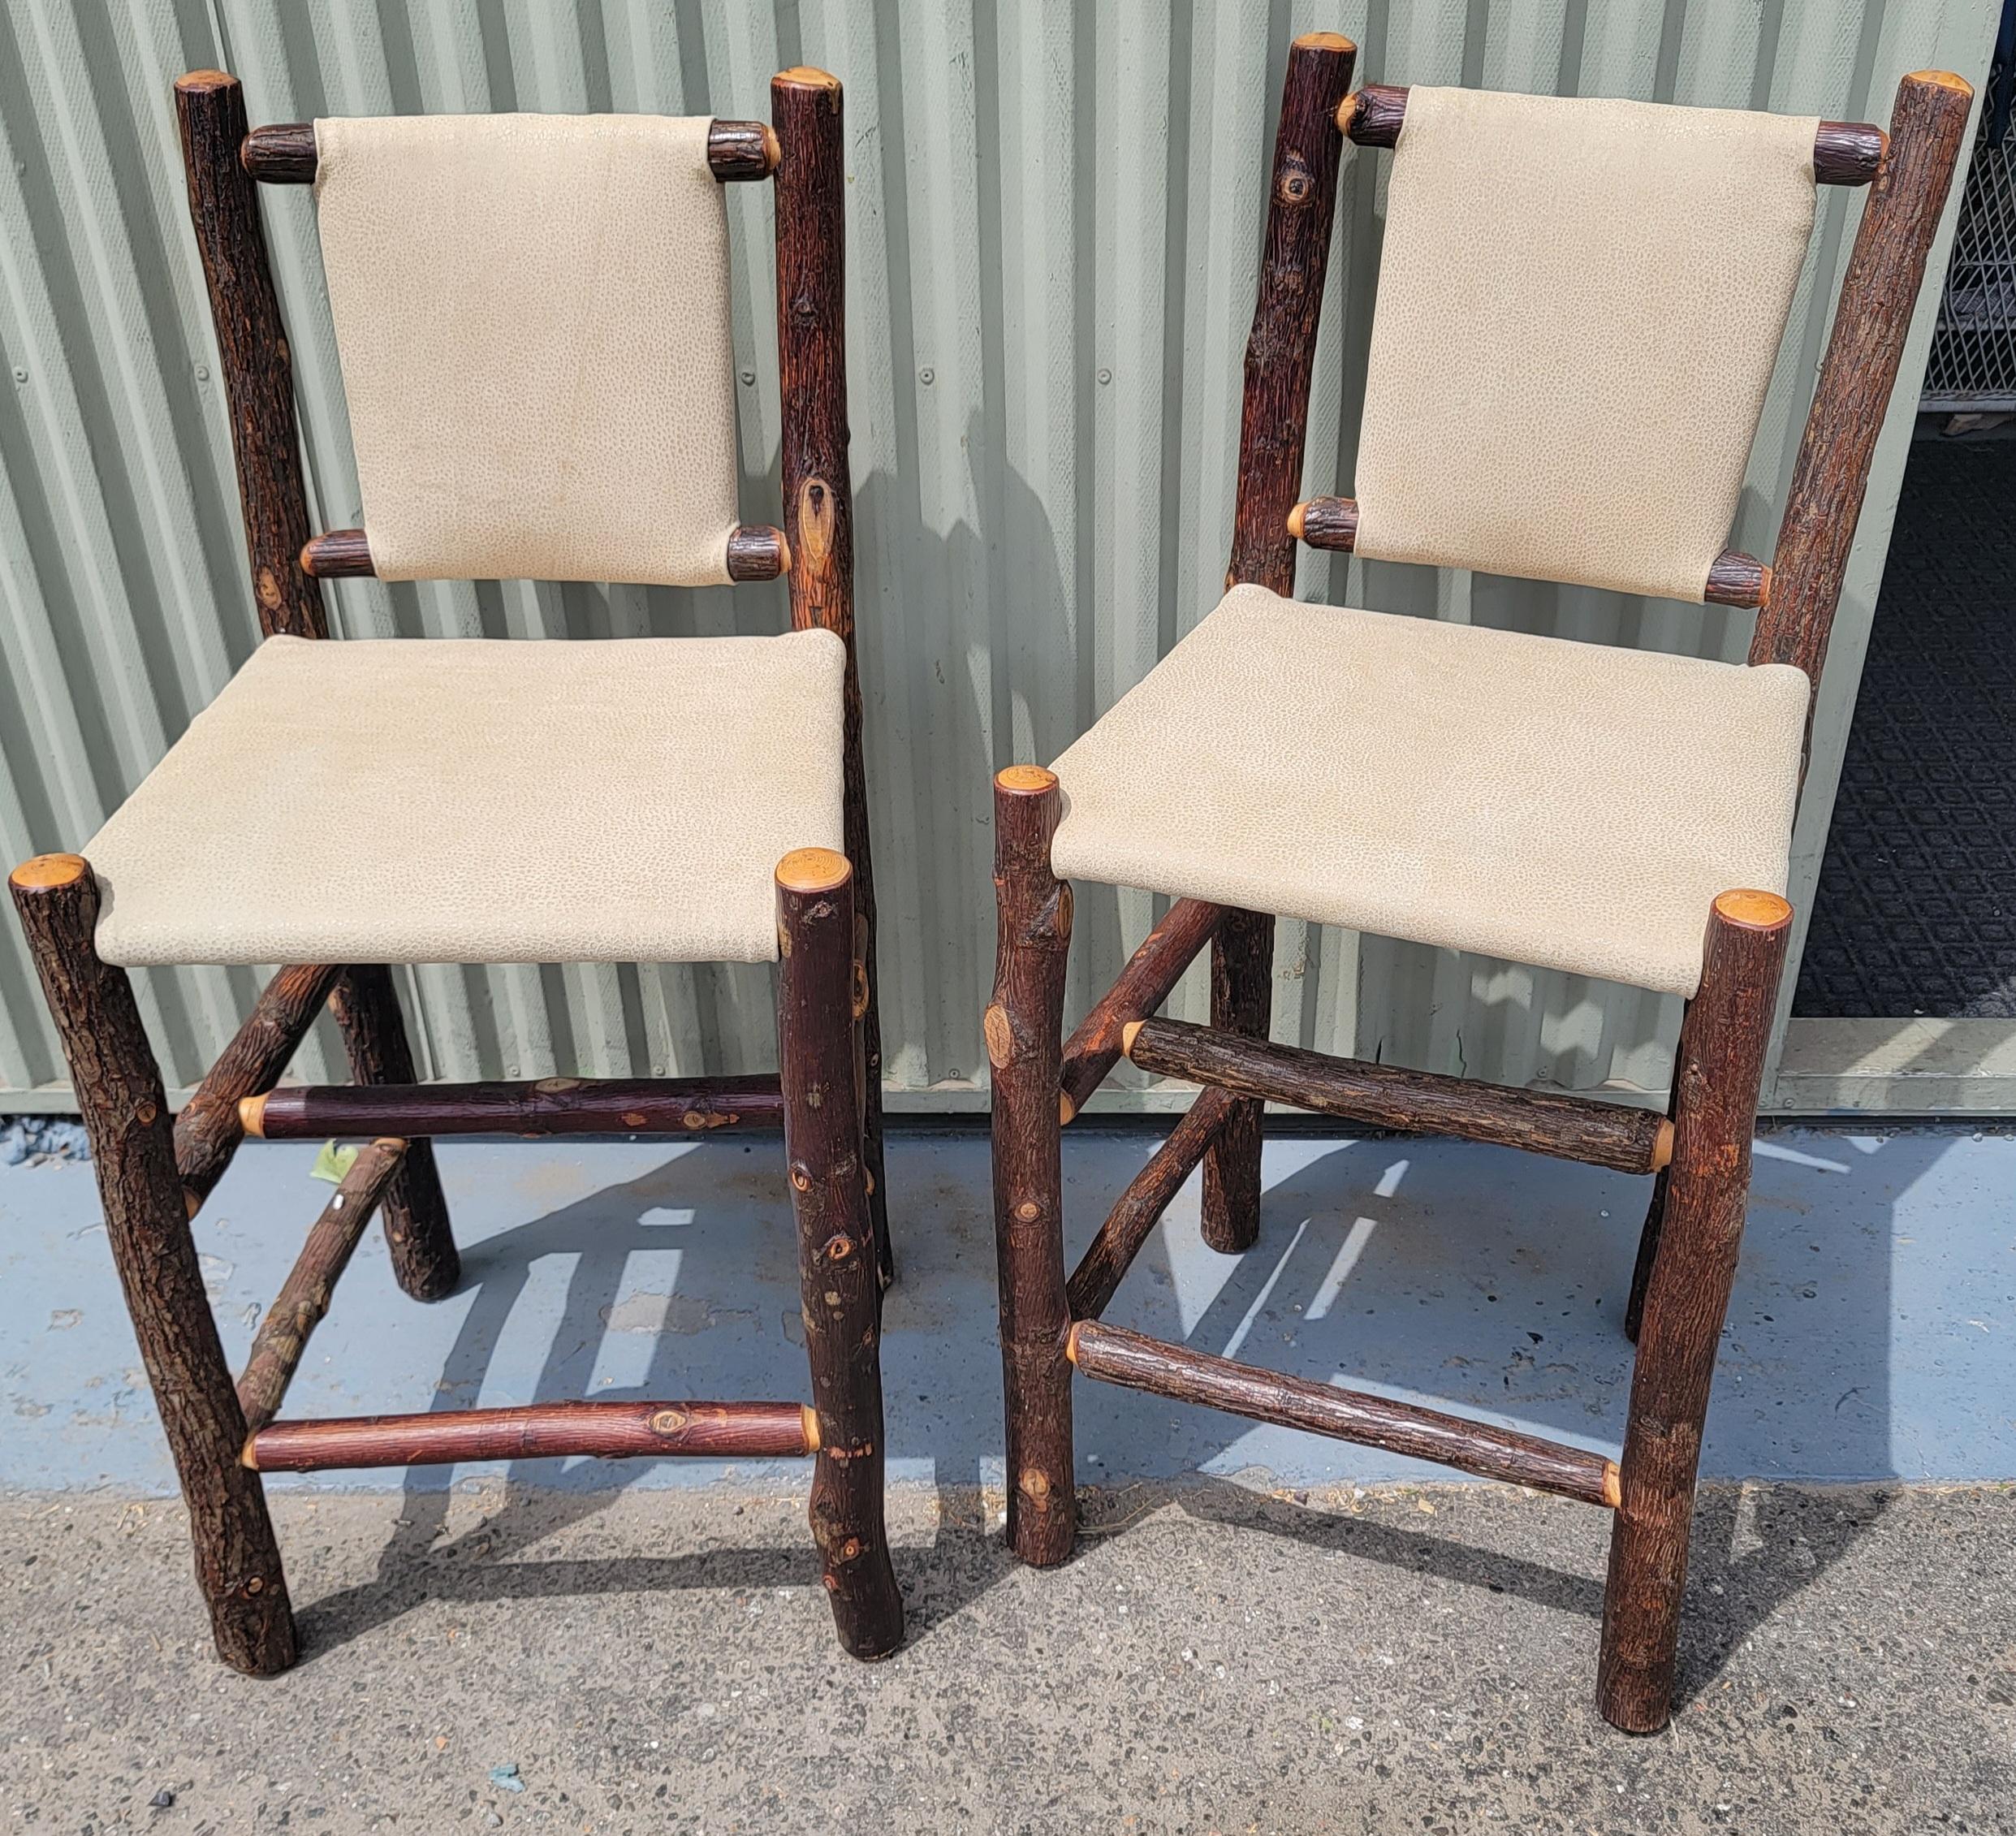 Rare Old Hickory Bar Stools W/ Leather Seats & Backs-Pair For Sale 1